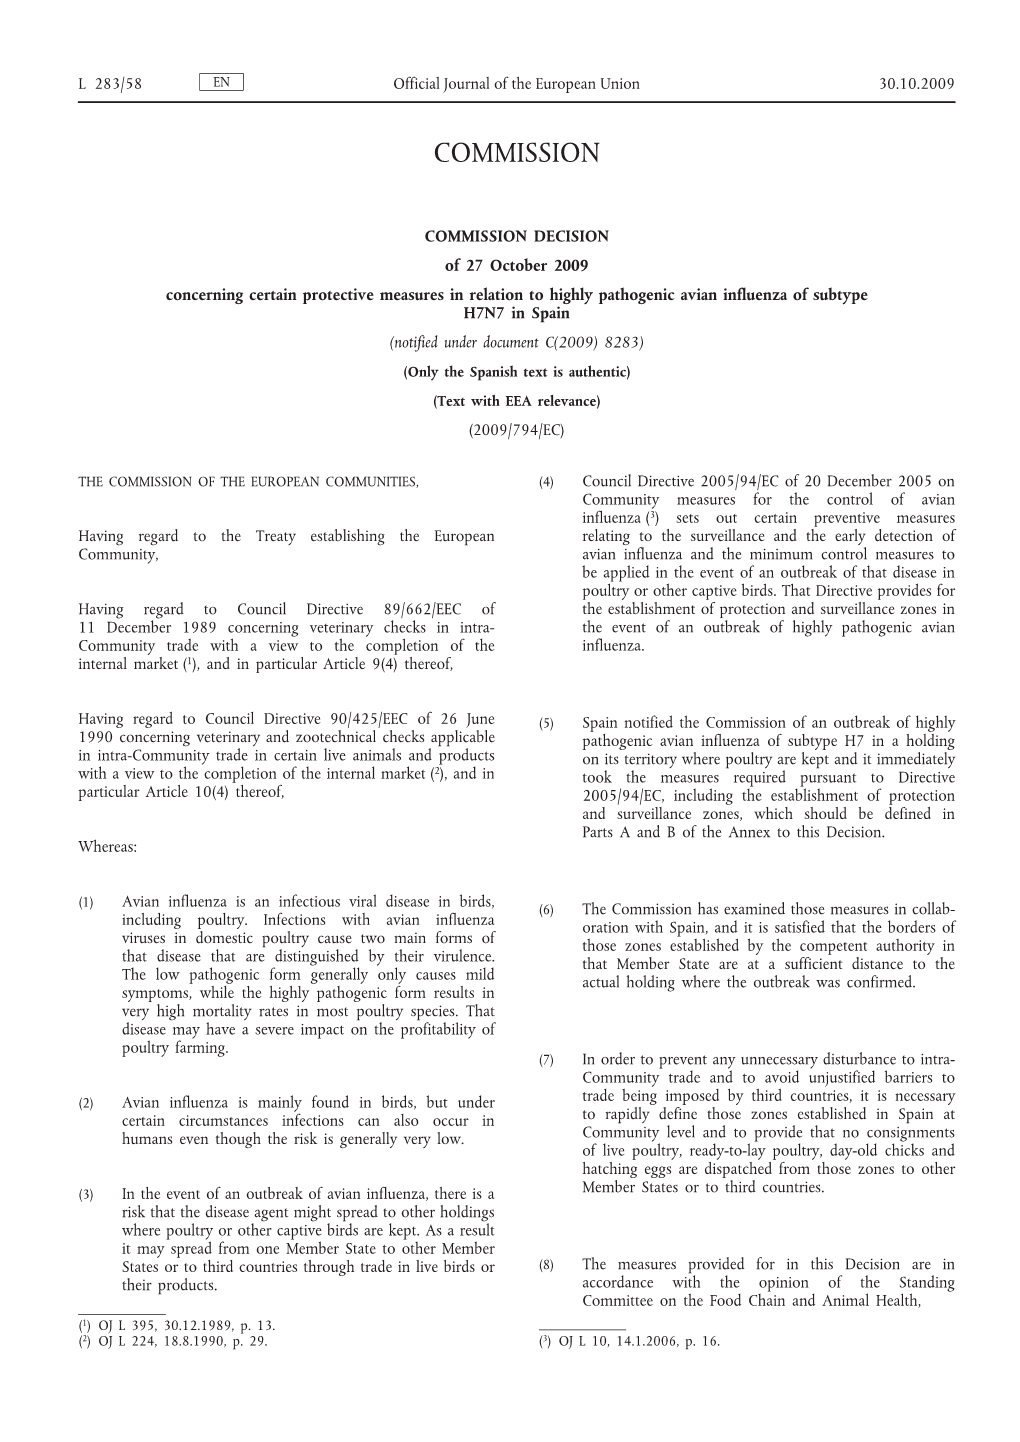 Commission Decision of 27 October 2009 Concerning Certain Protective